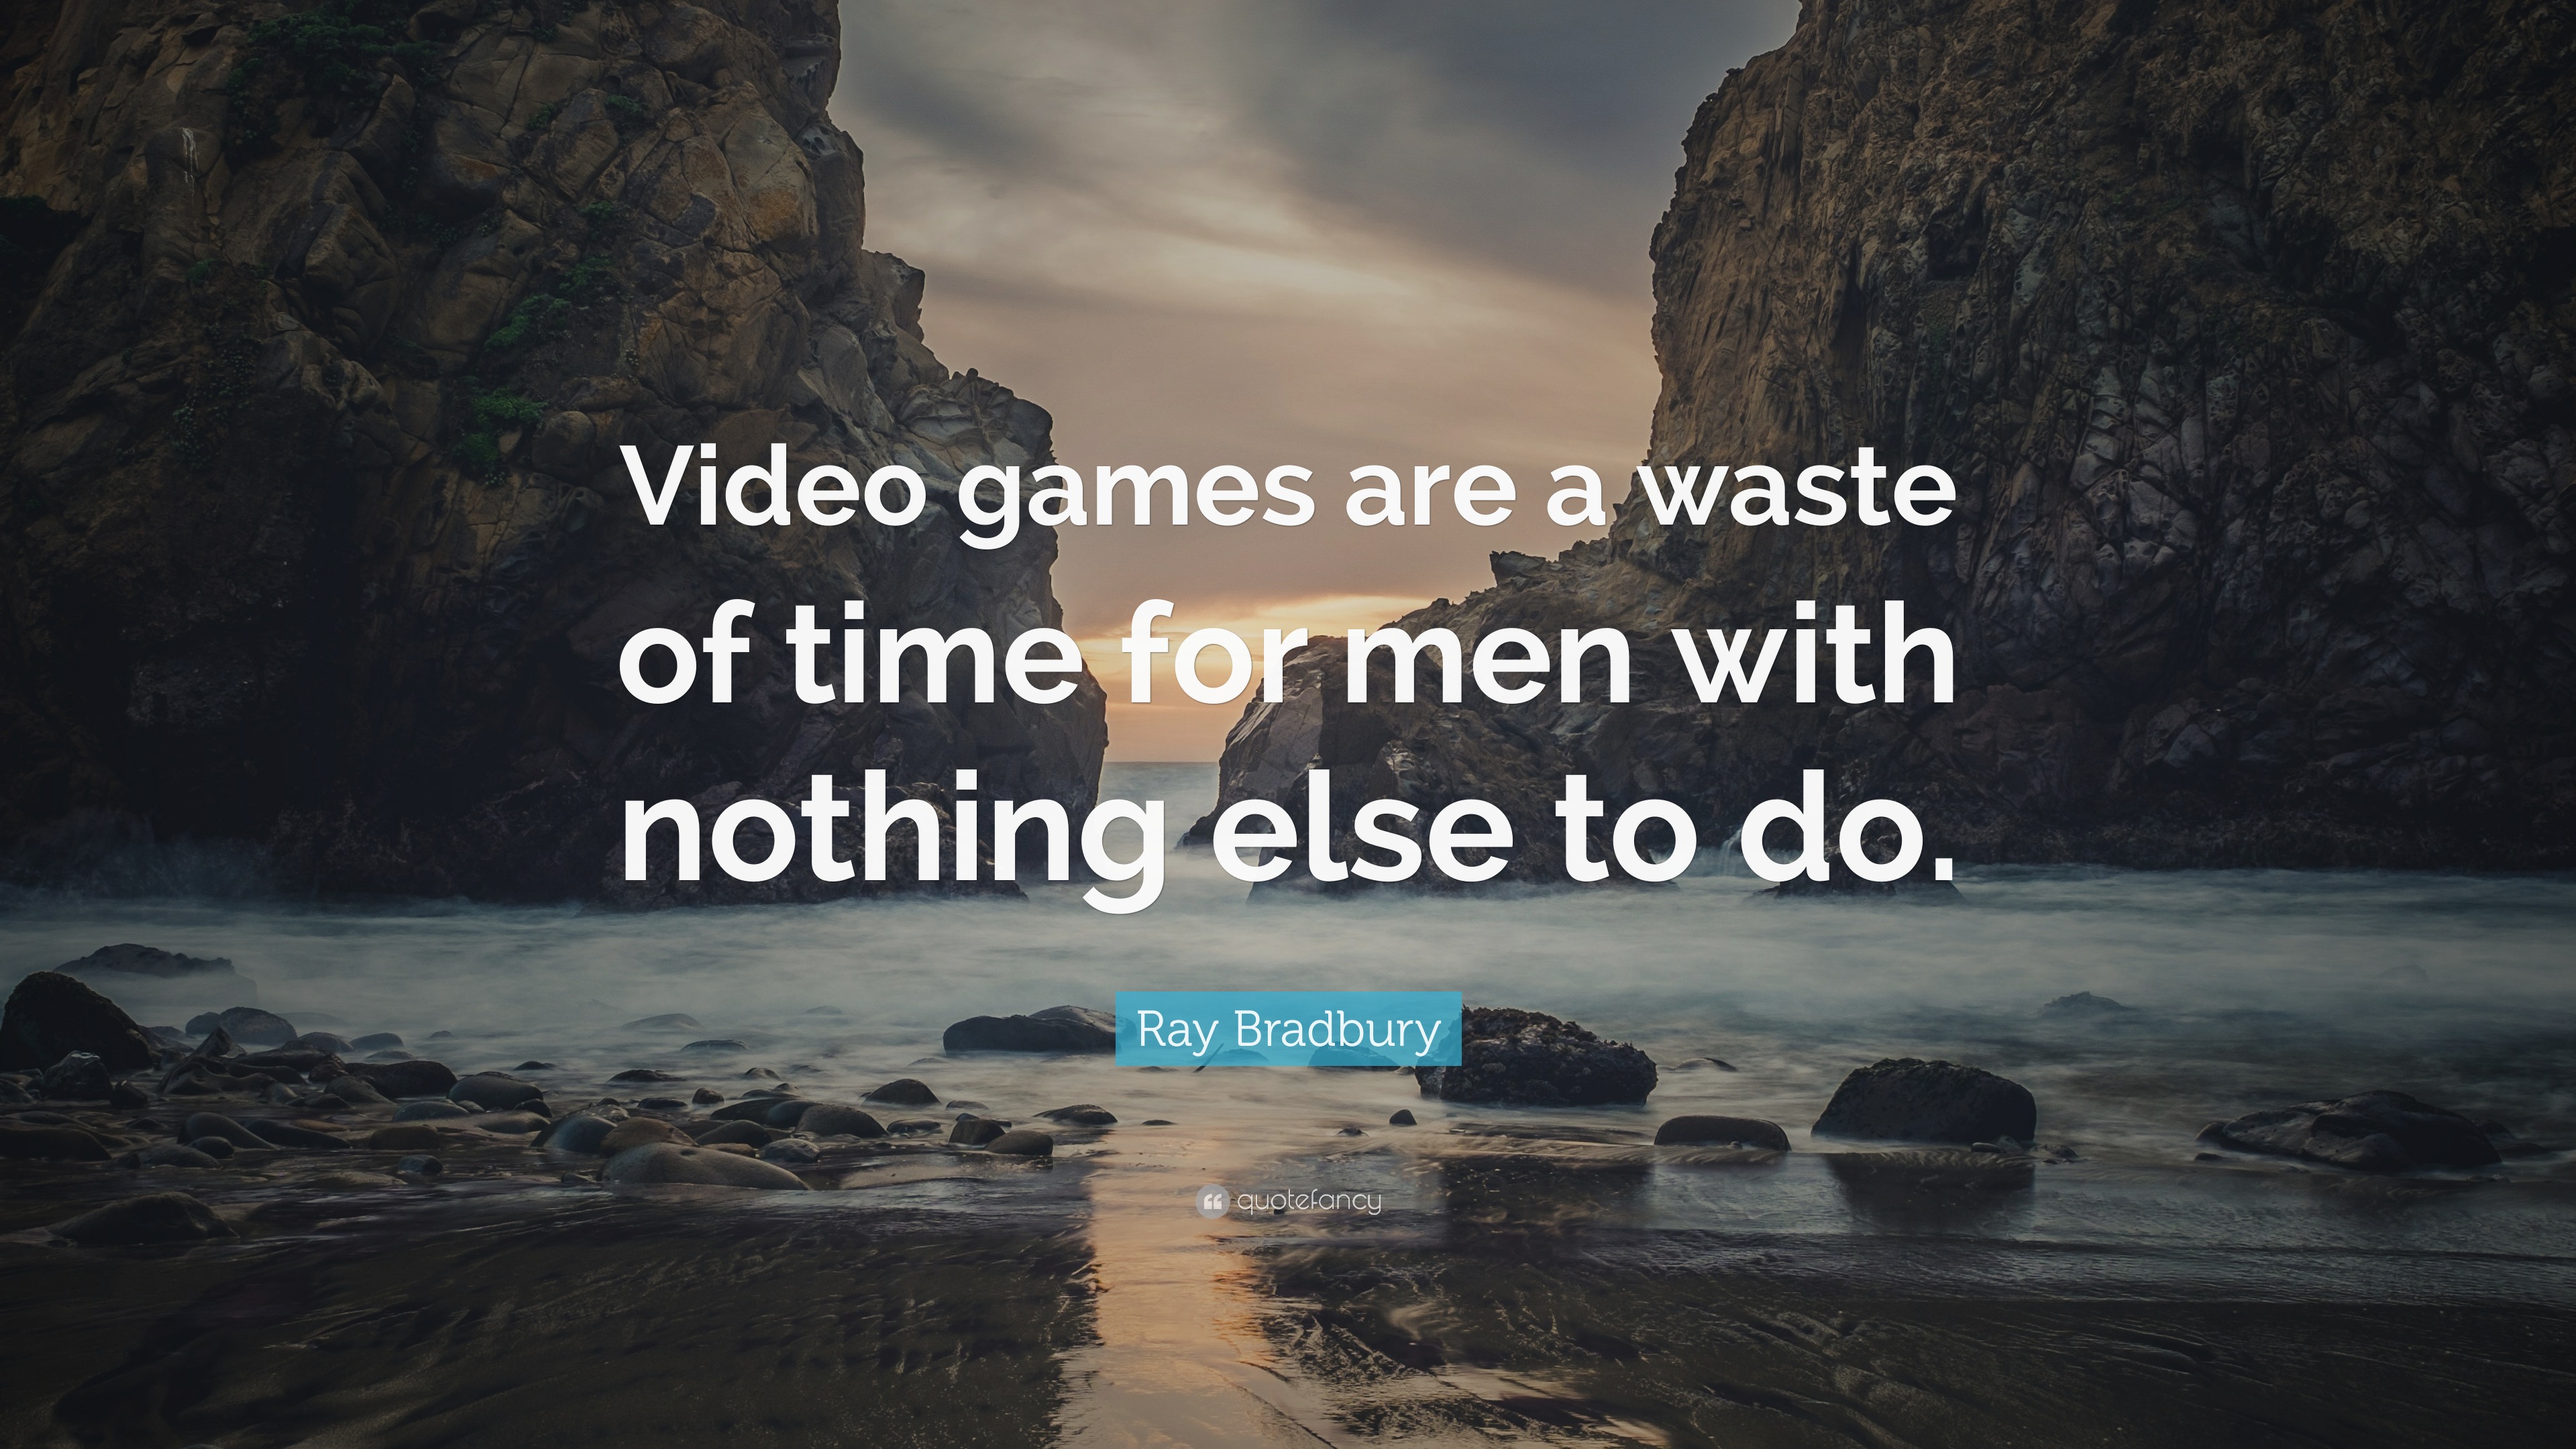 Ray Bradbury Quote: “Video games are a waste of time for men with